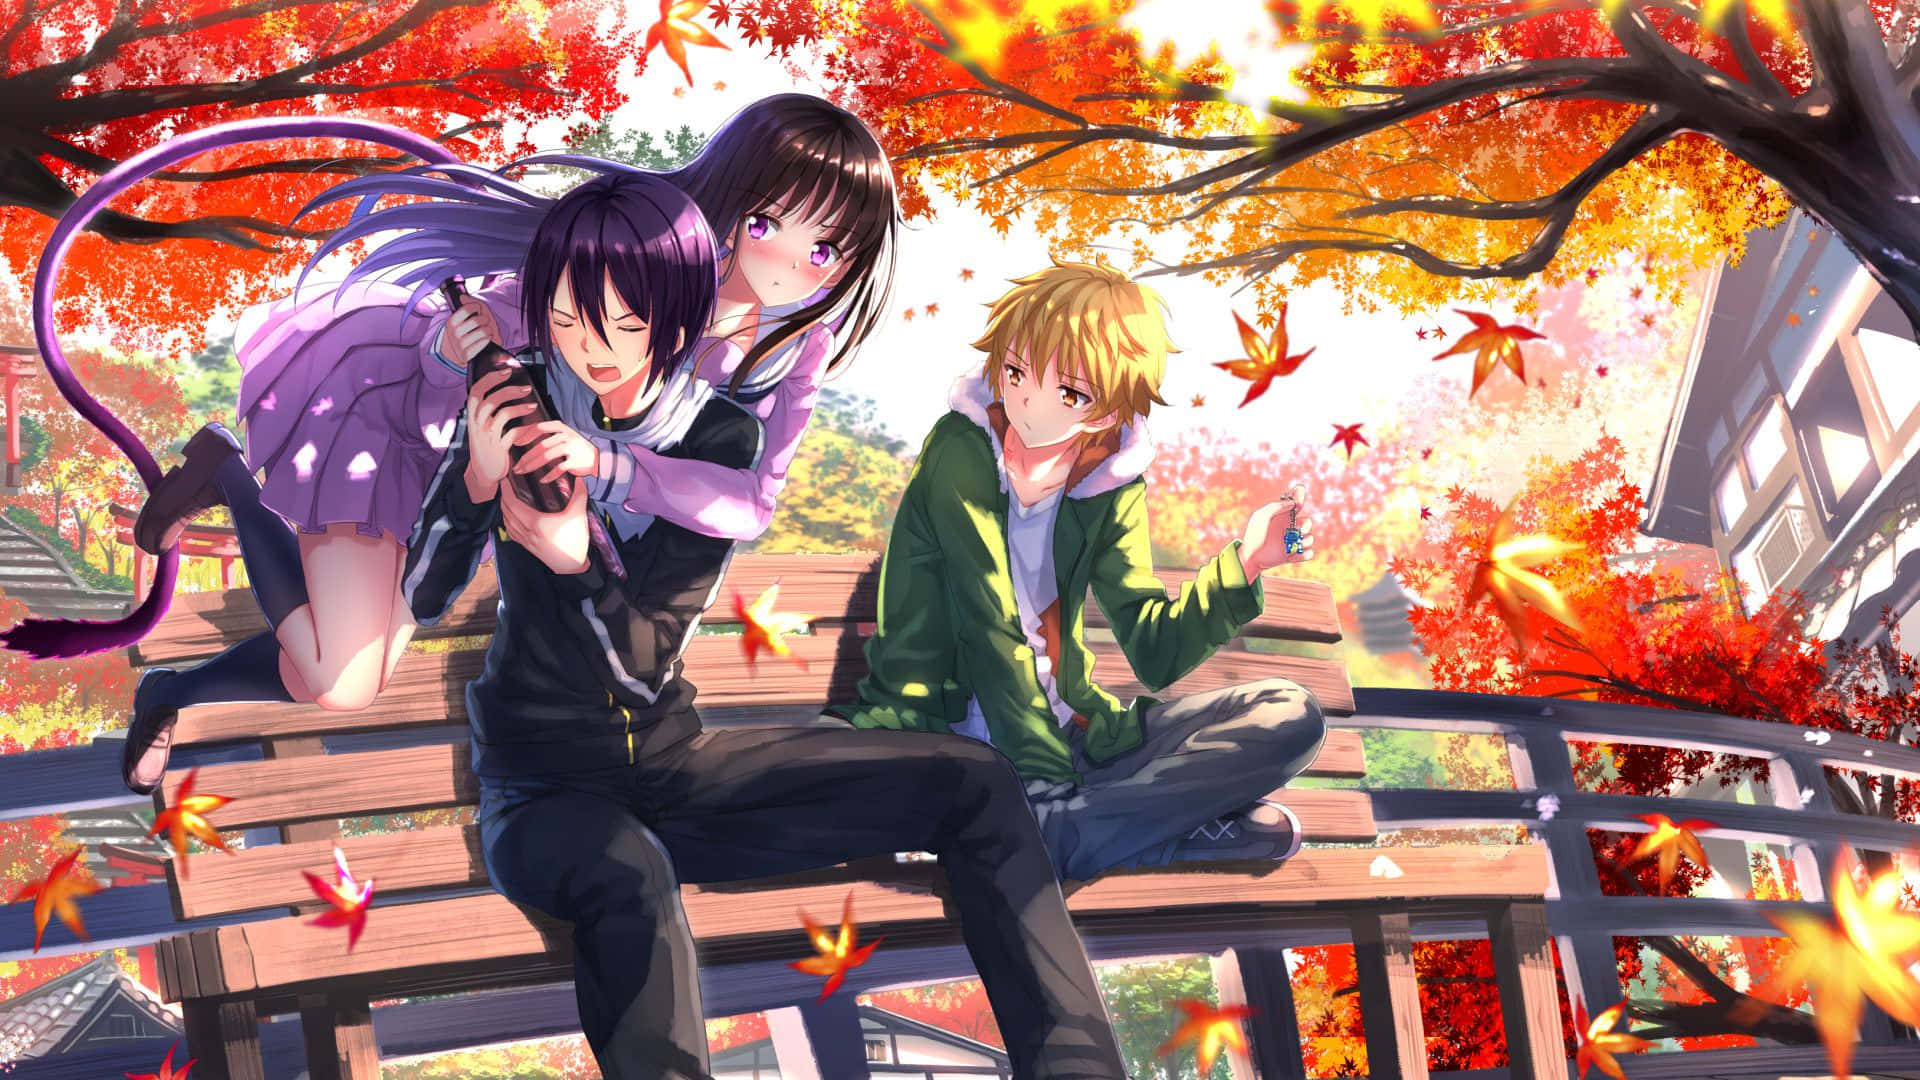 Discover the world of Noragami!